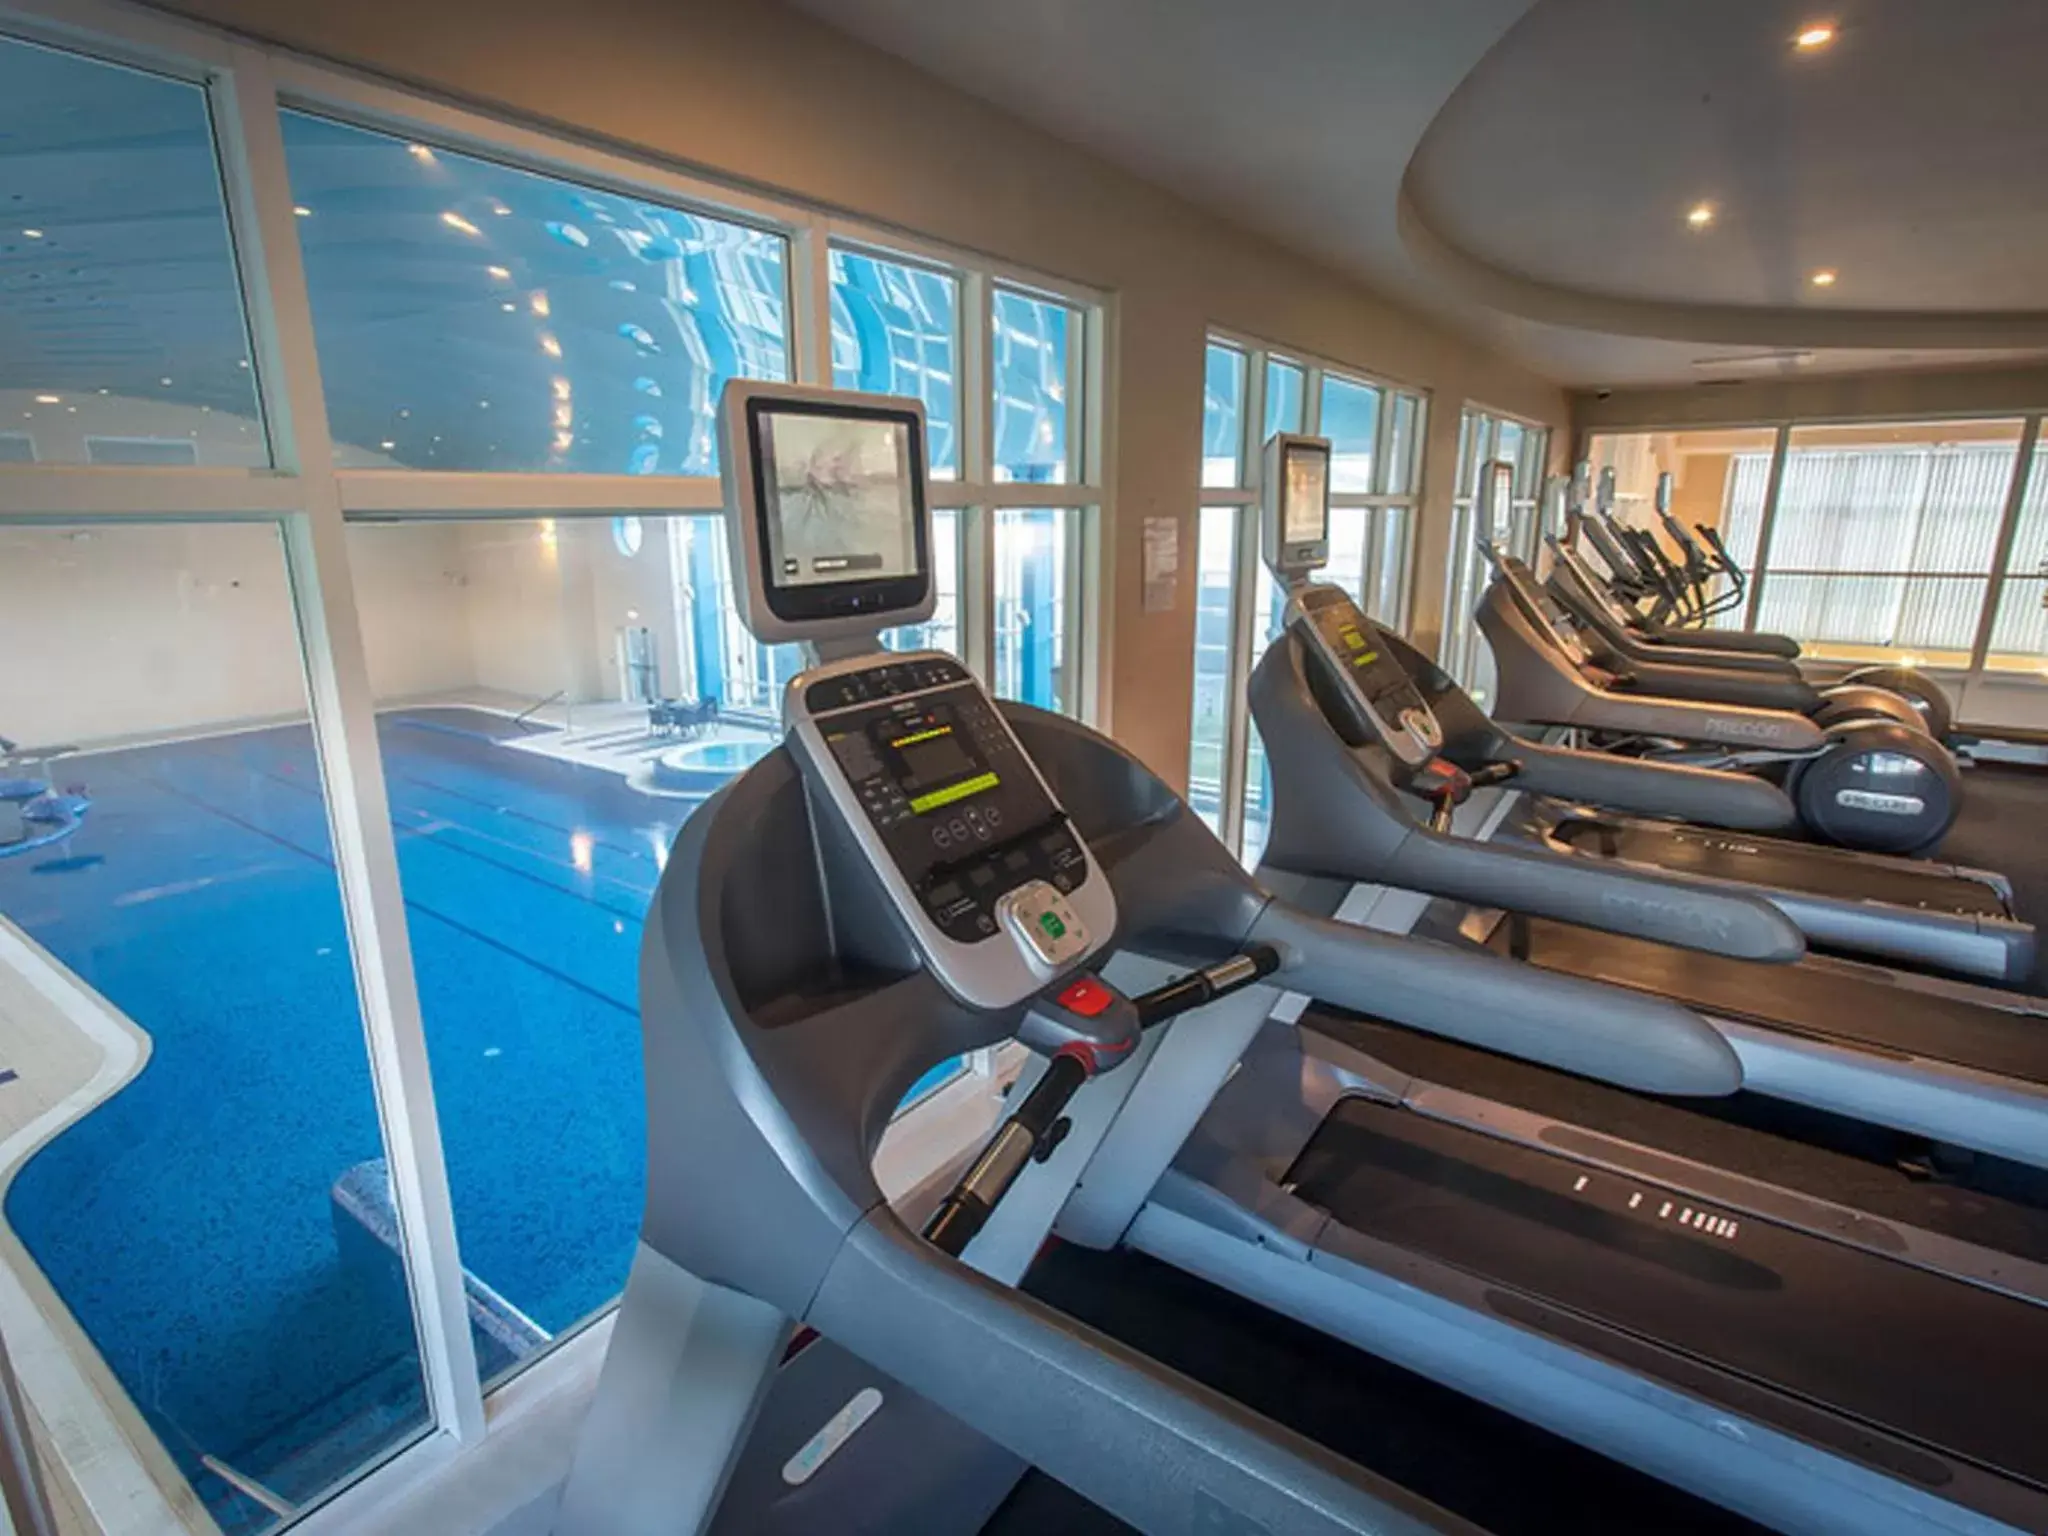 Fitness centre/facilities, Fitness Center/Facilities in Charleville Park Hotel & Leisure Club IRELAND